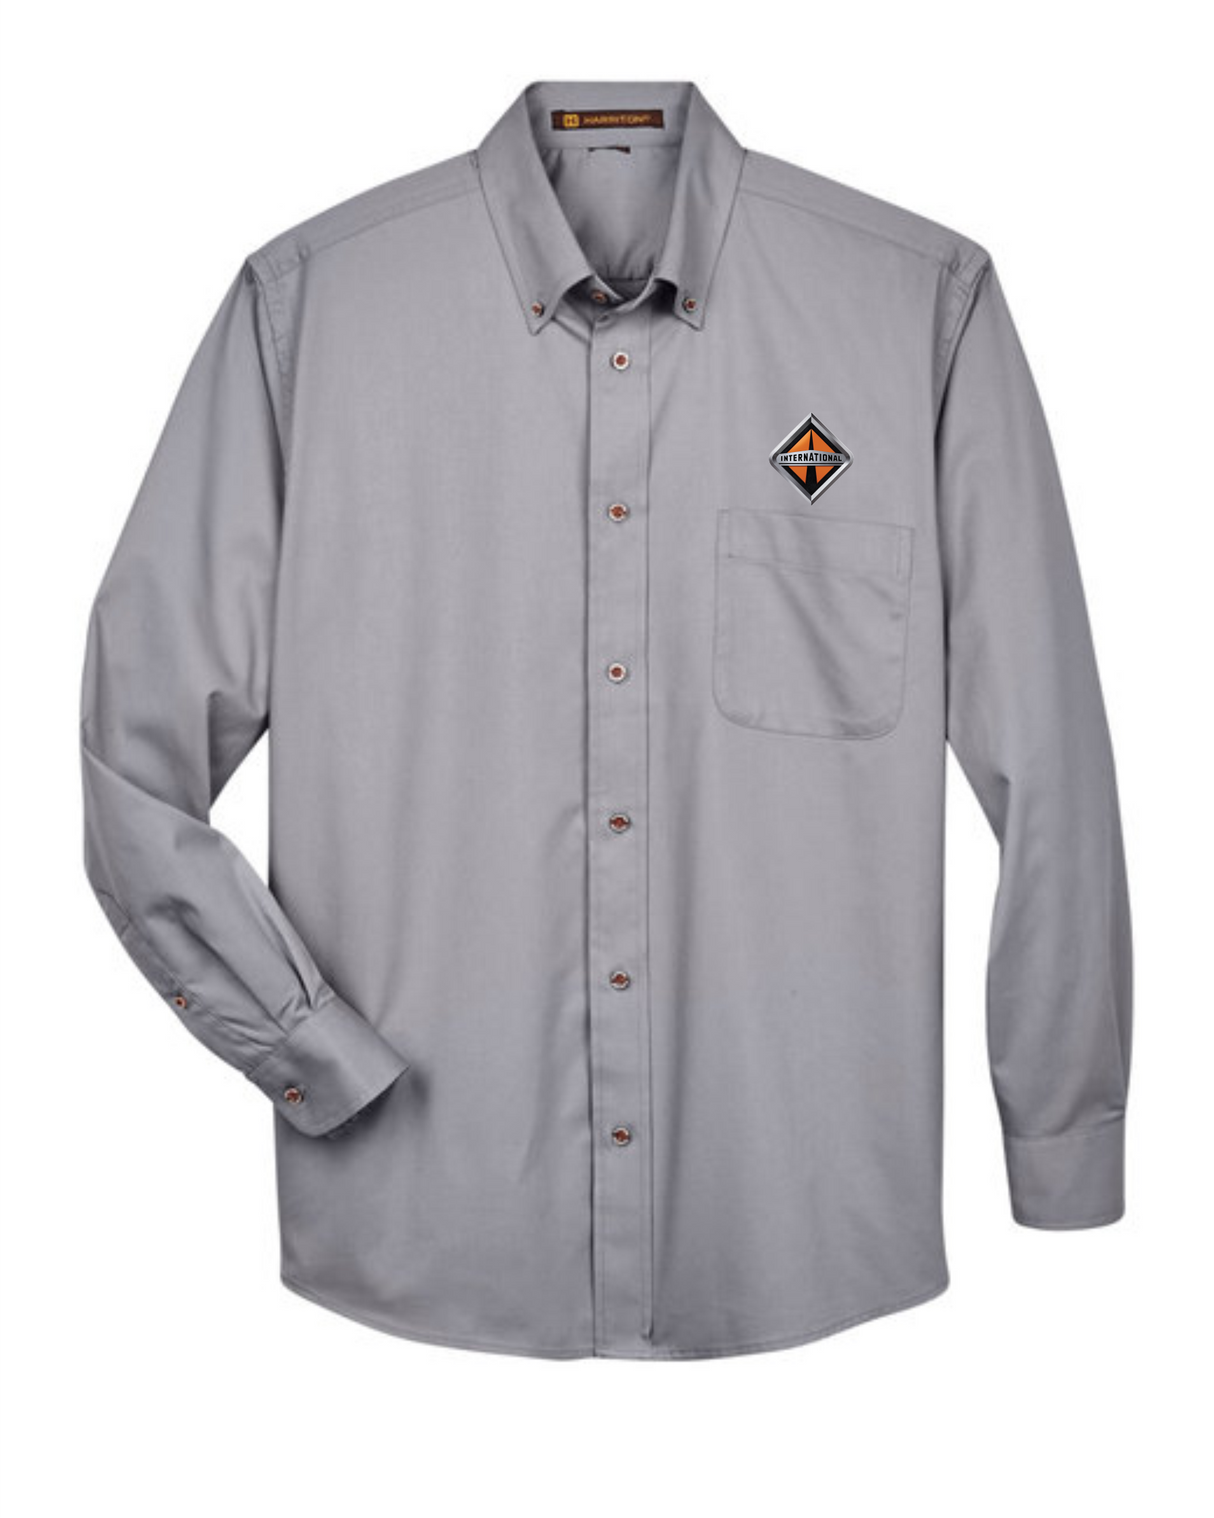 Border International Diamond Logo Tall Easy Blend™ Long-Sleeve Twill Shirt with Stain-Release